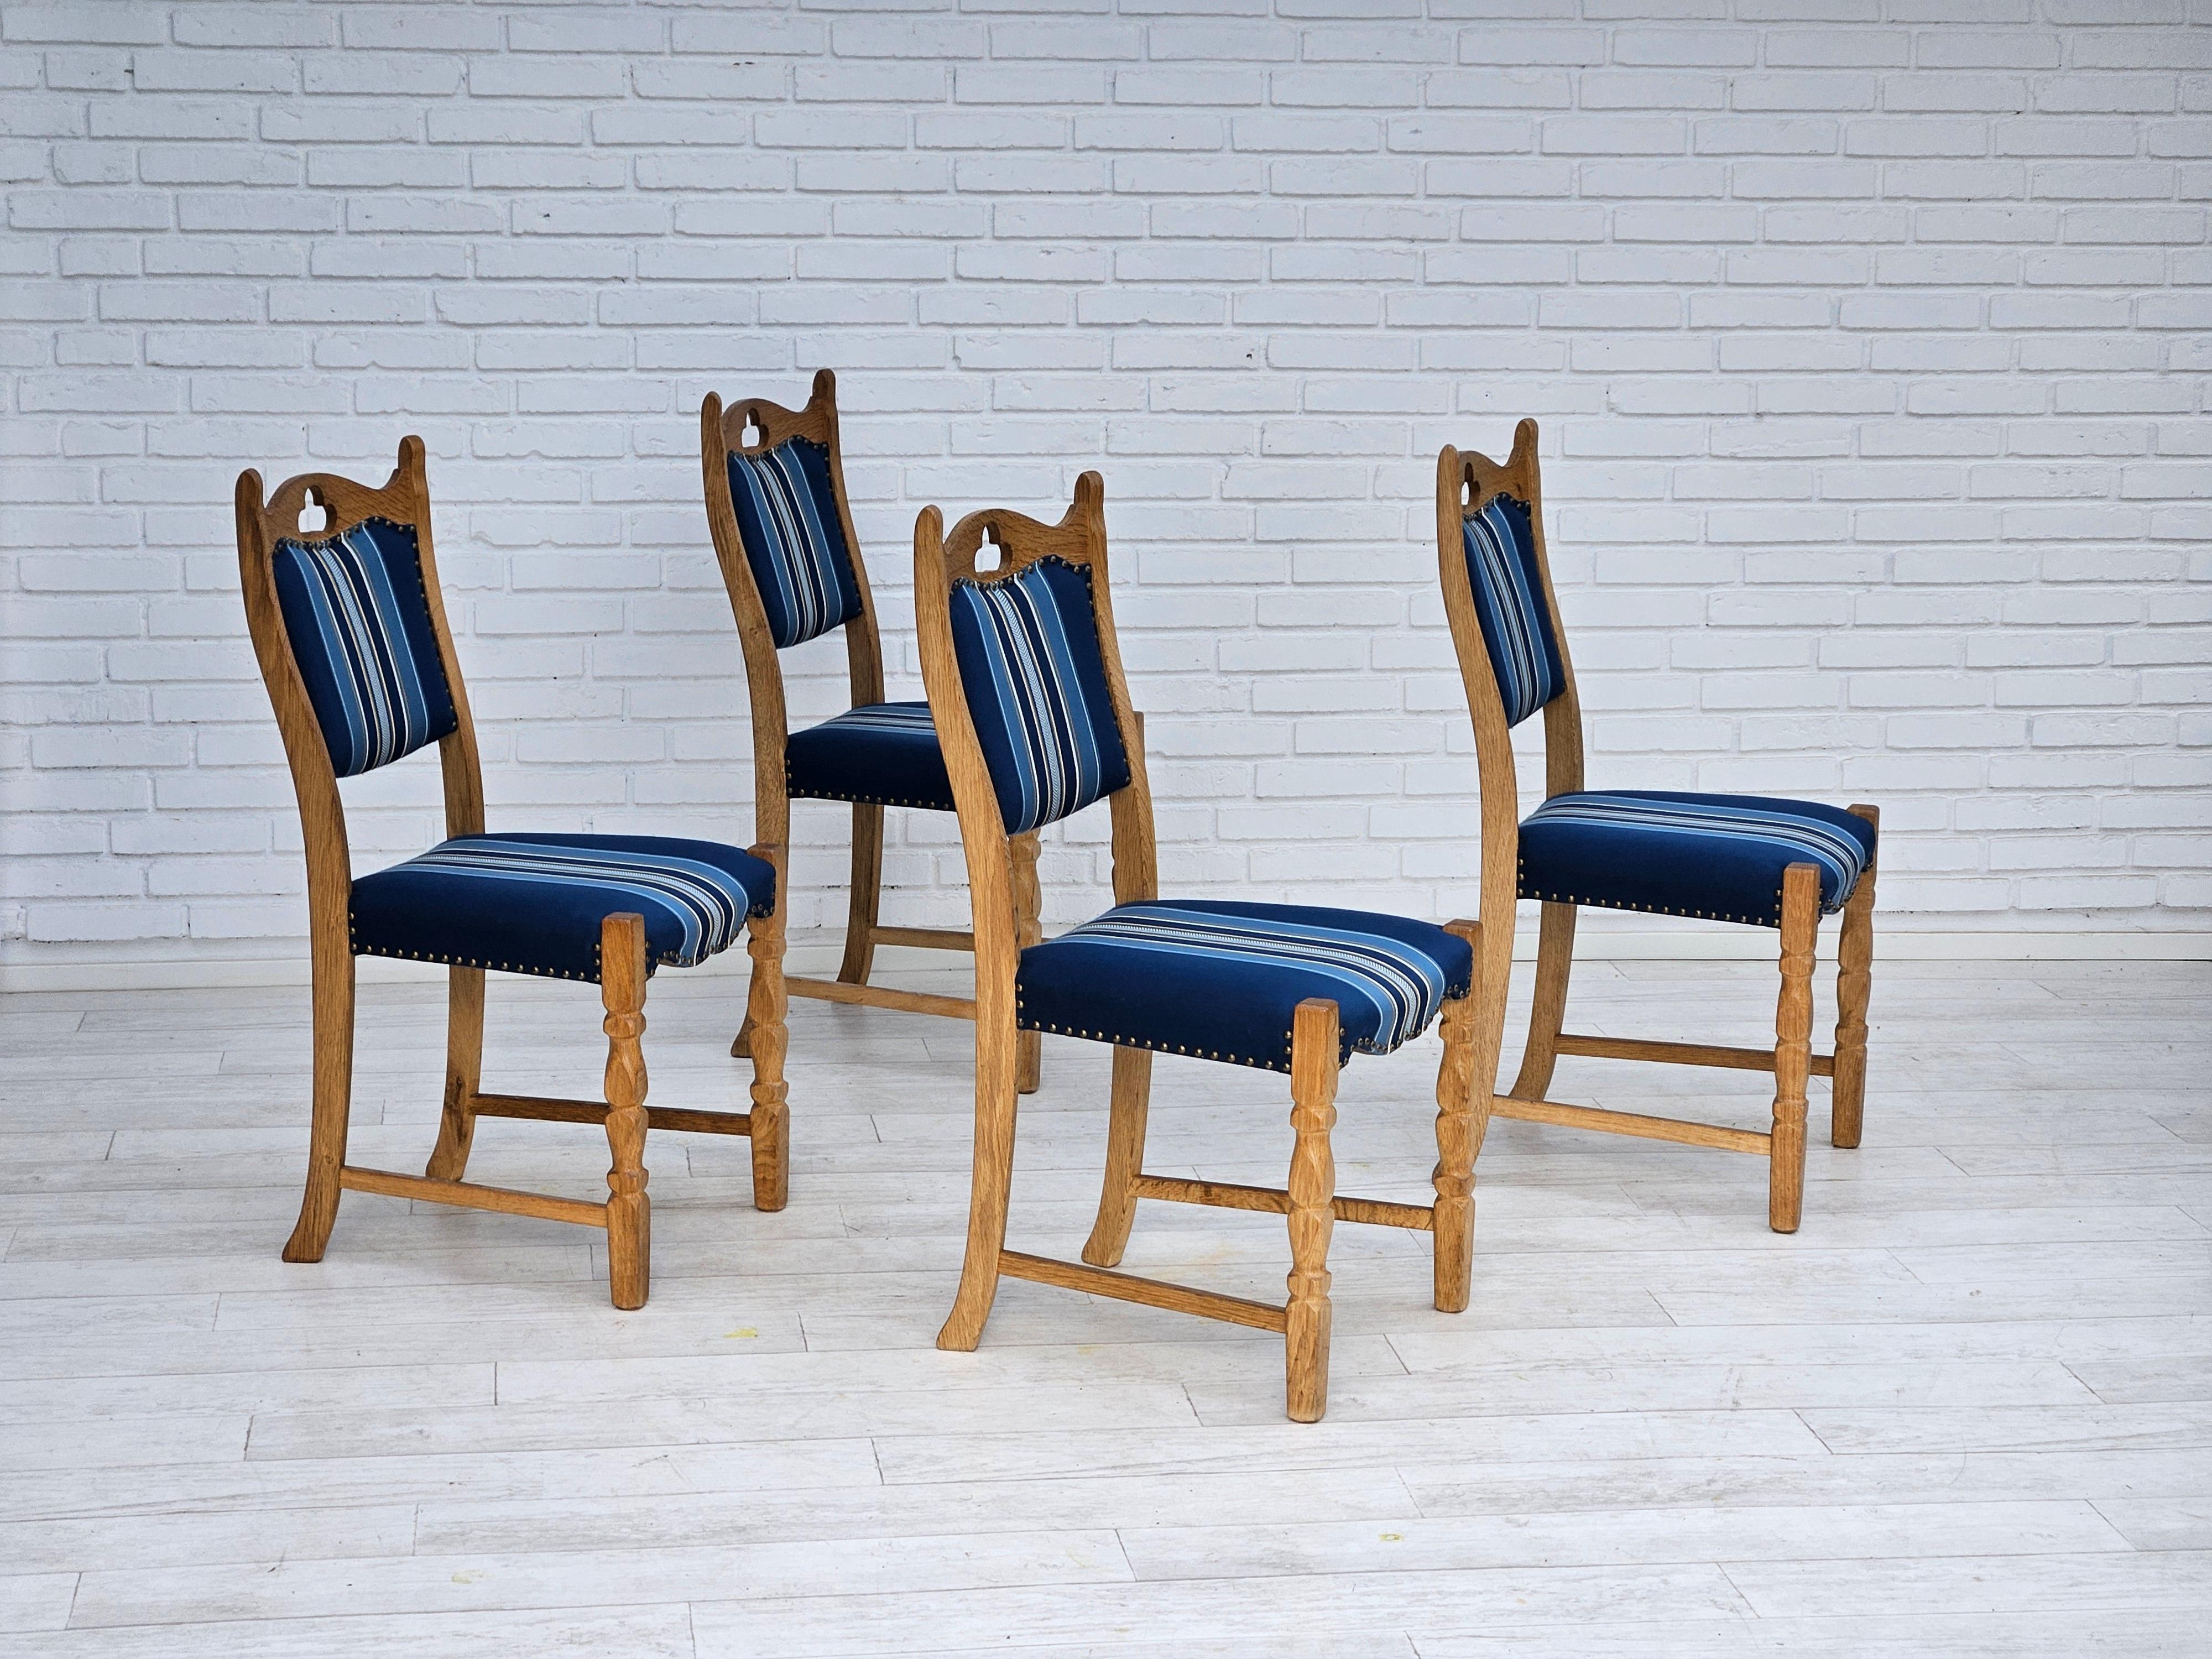 1960s, set of 4 pcs Danish dining chairs. Original very good condition: no smells and no stains. Furniture wool fabric, dark oak wood. Manufactured by Danish furniture manufacturer in about 1960s.